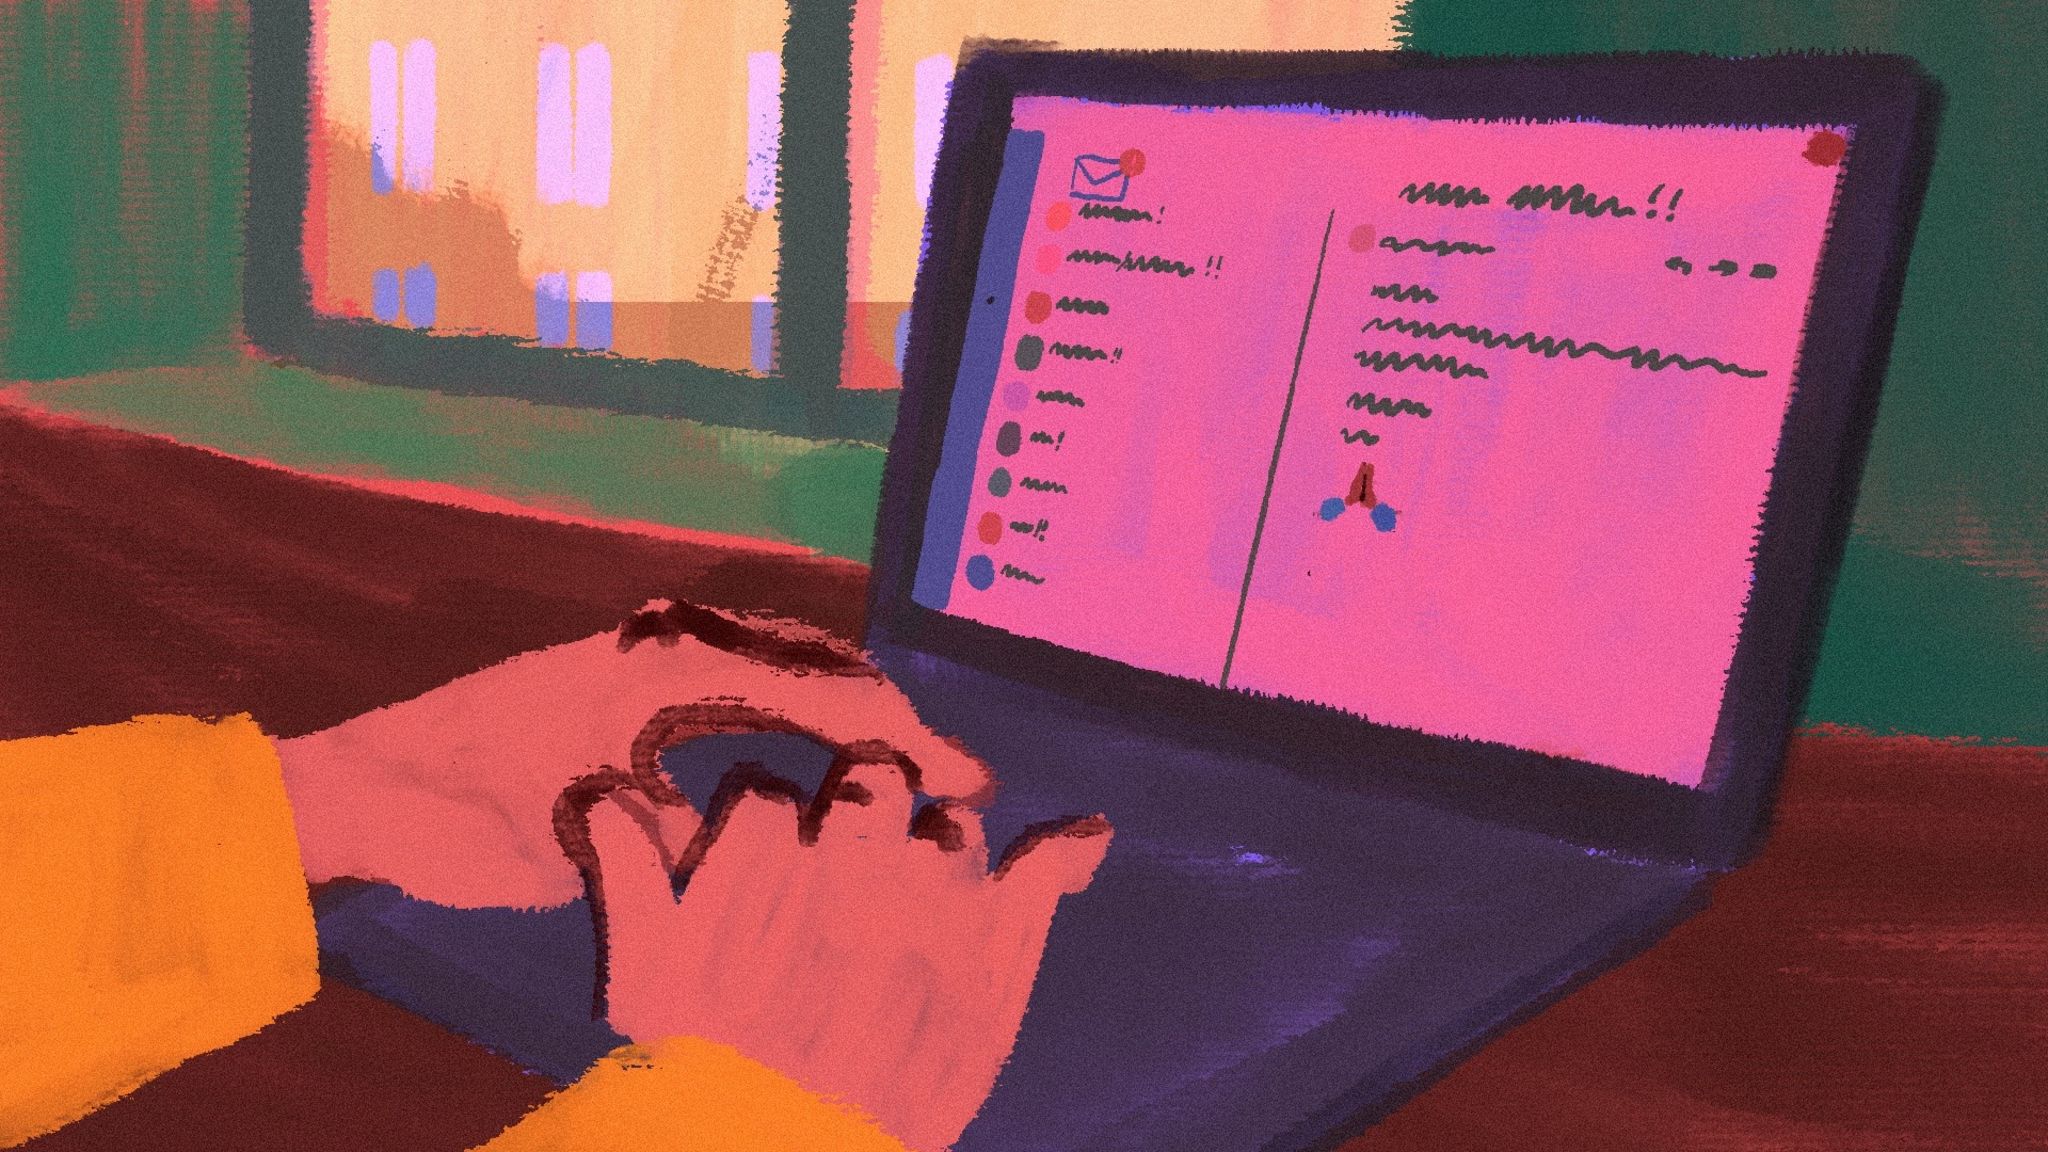 Hands on a laptop